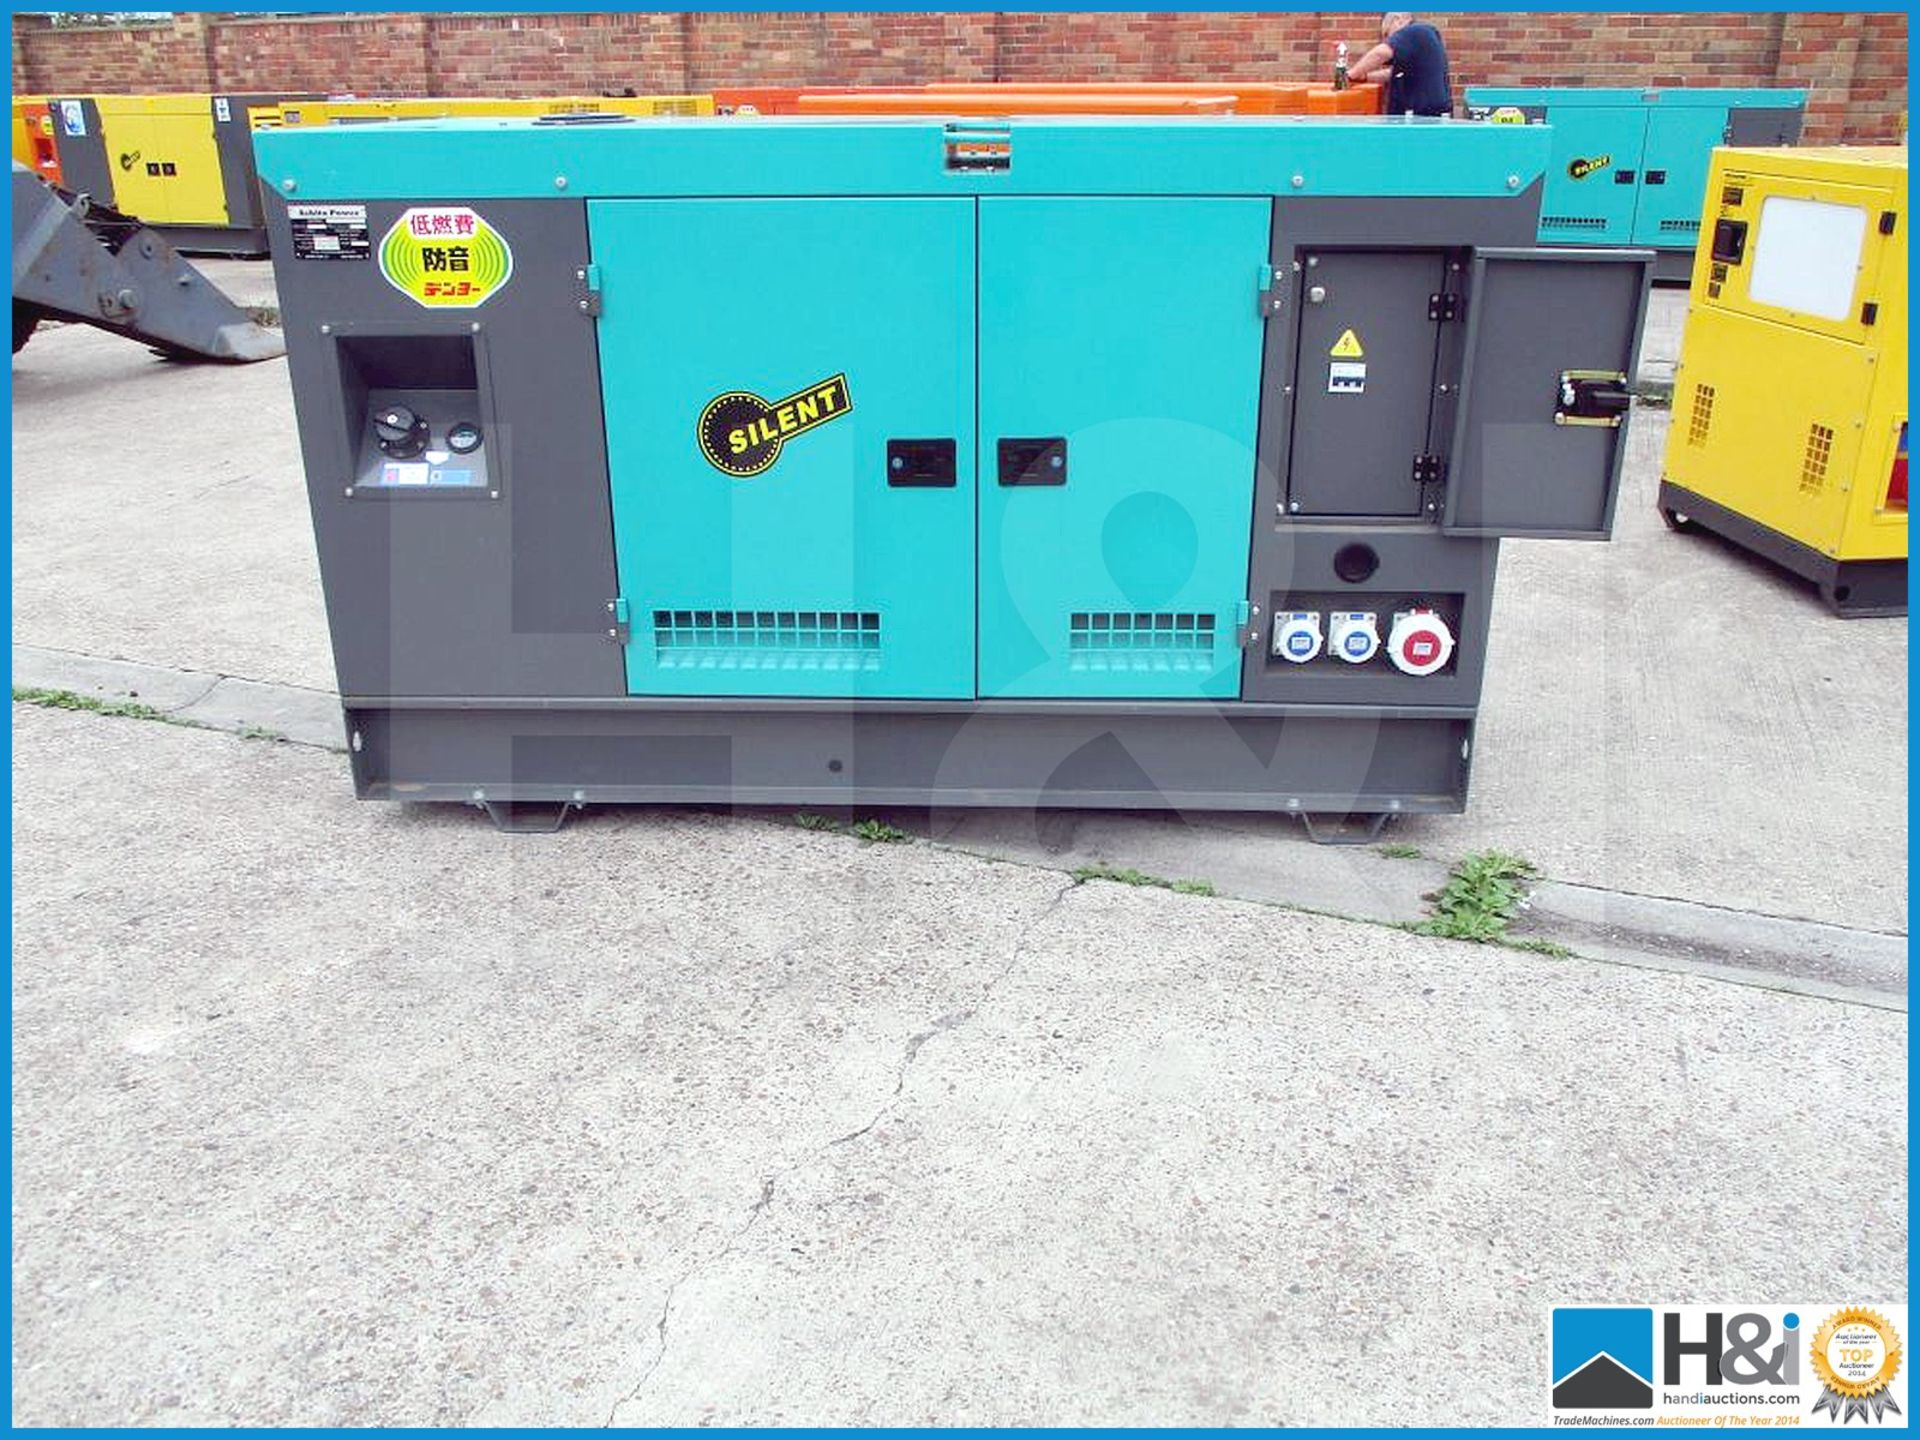 Brand new, unused Ashita 40KvA diesel generator. No oil or water and ready for transportation. Singl